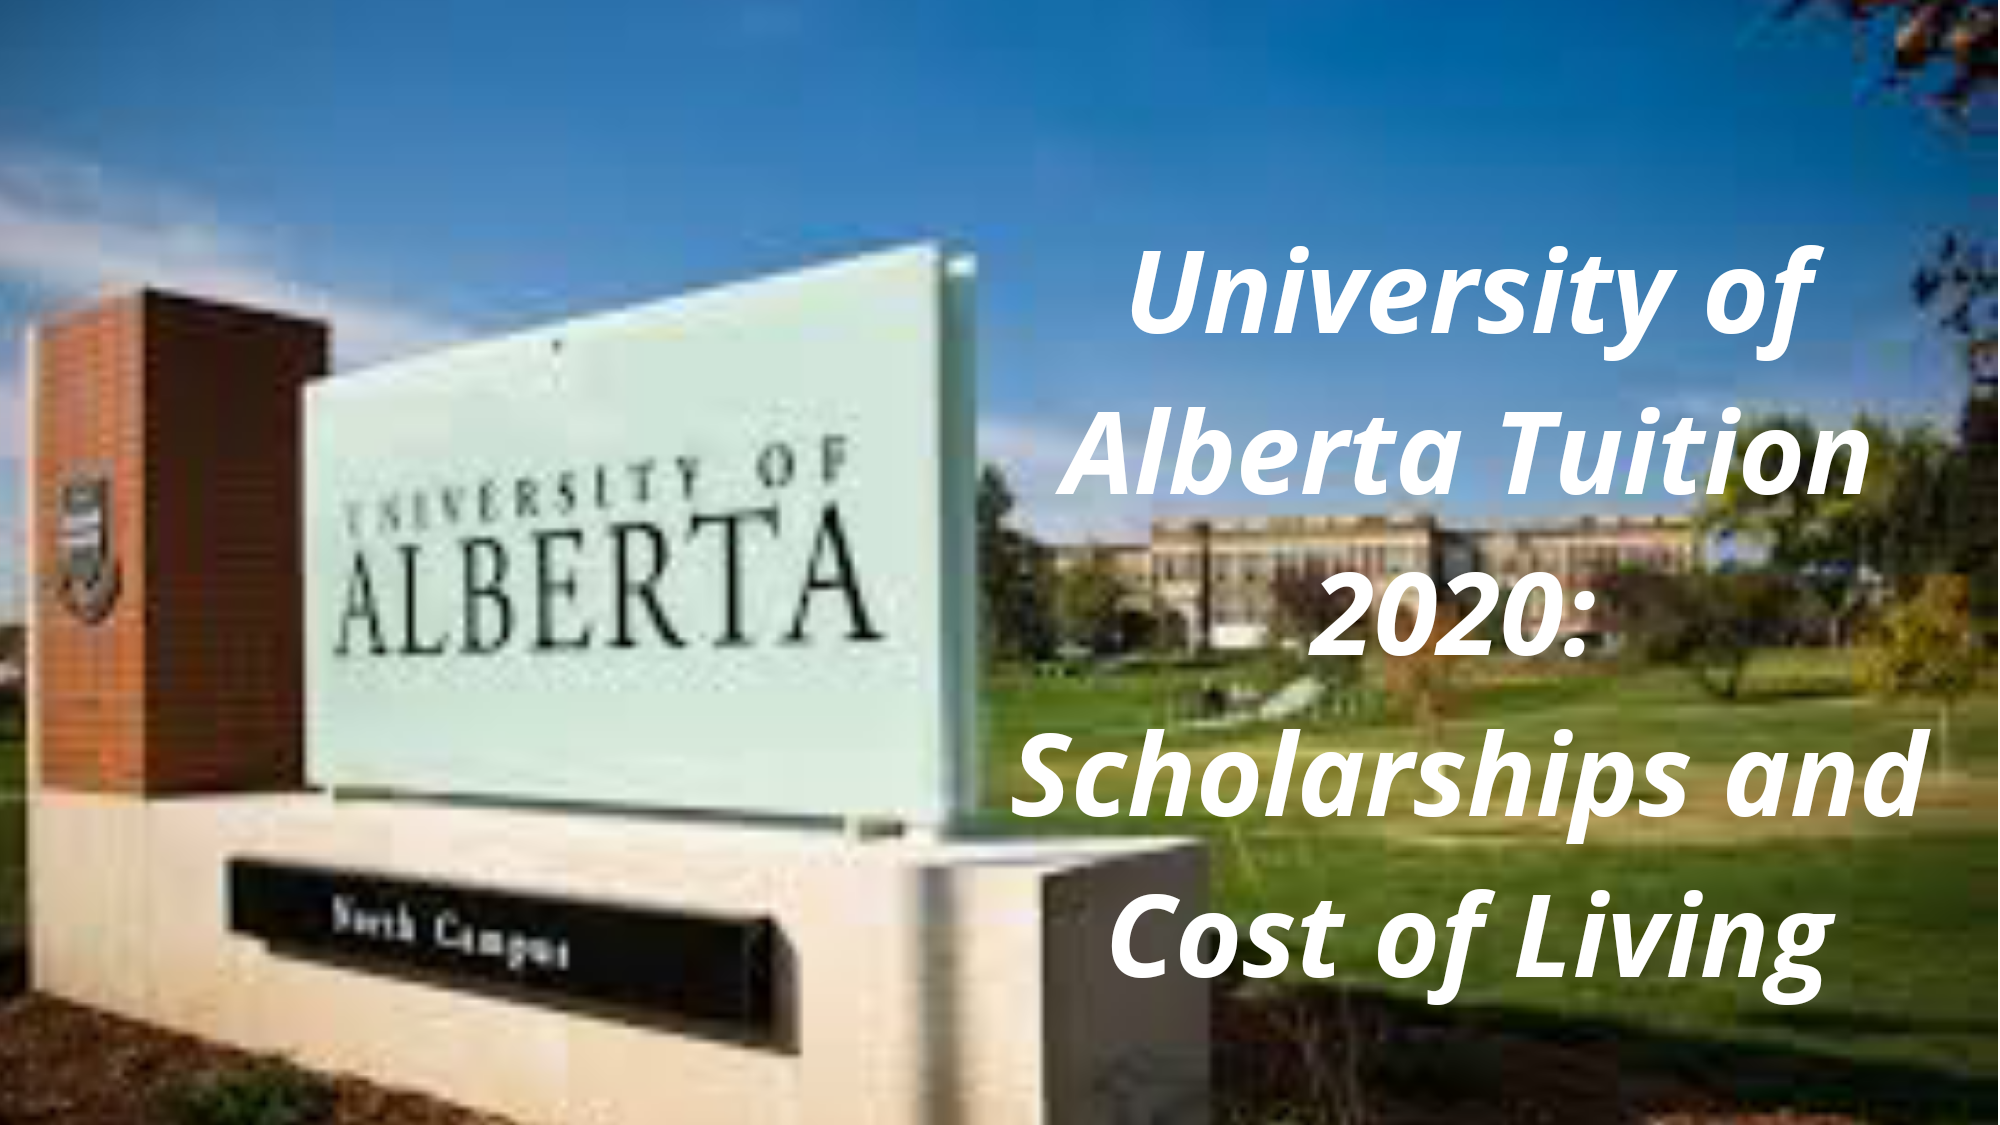 University of Alberta Tuition 2020 Scholarships and Cost of Living